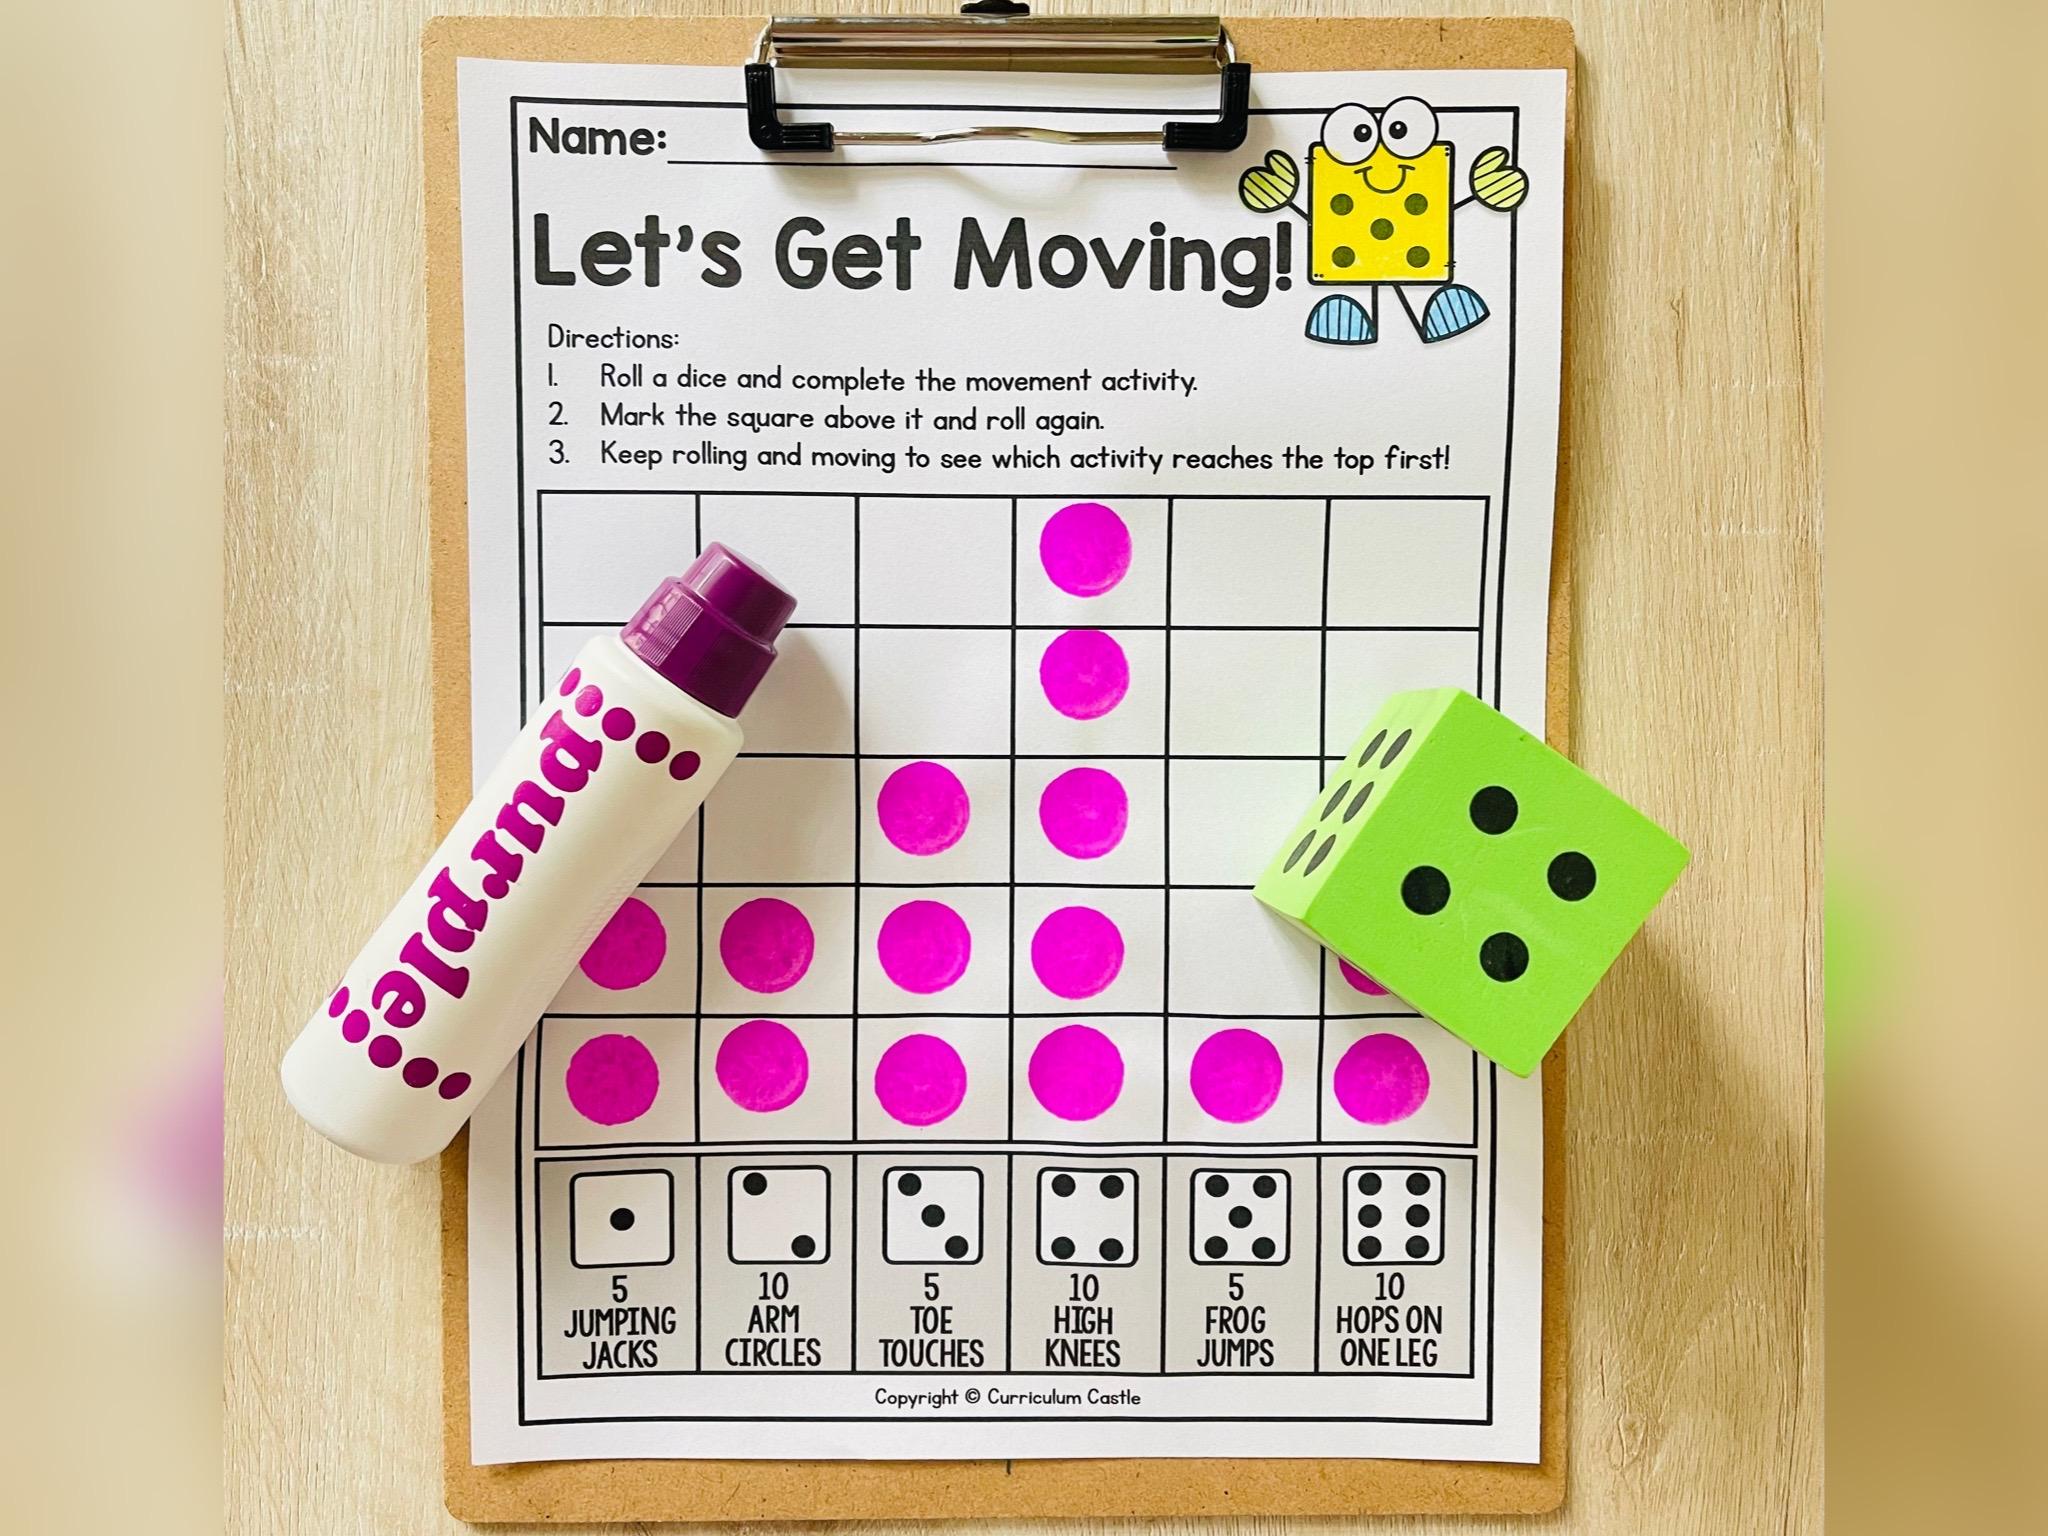 Dice Roll Printable Decision Maker Game Decision (Download Now) 